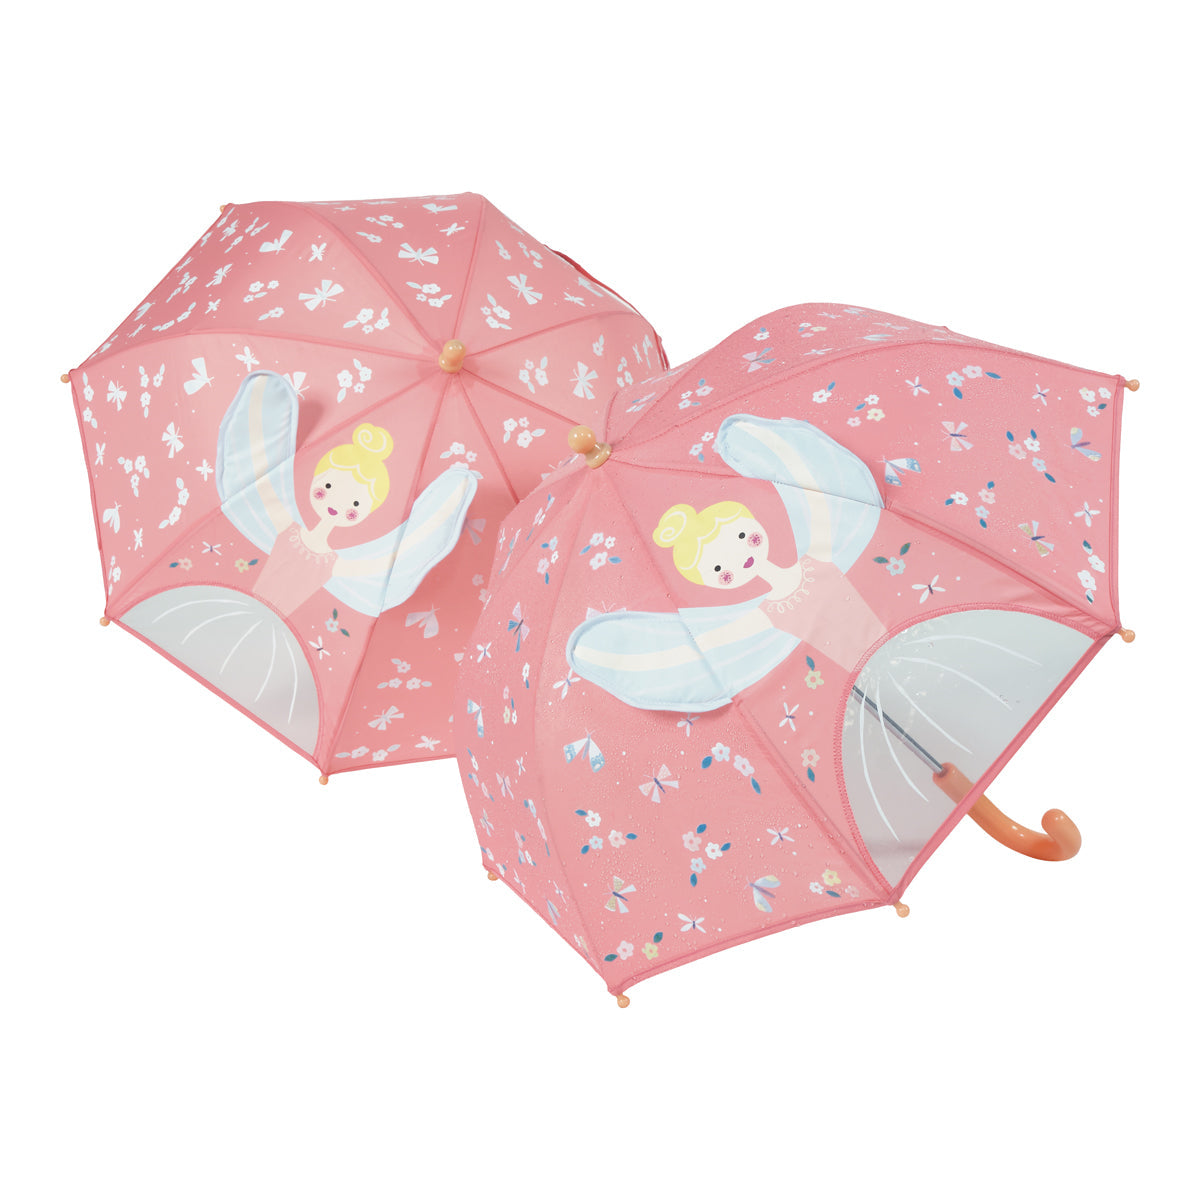 Colour Changing 3D Umbrella - Enchanted by Floss & Rock